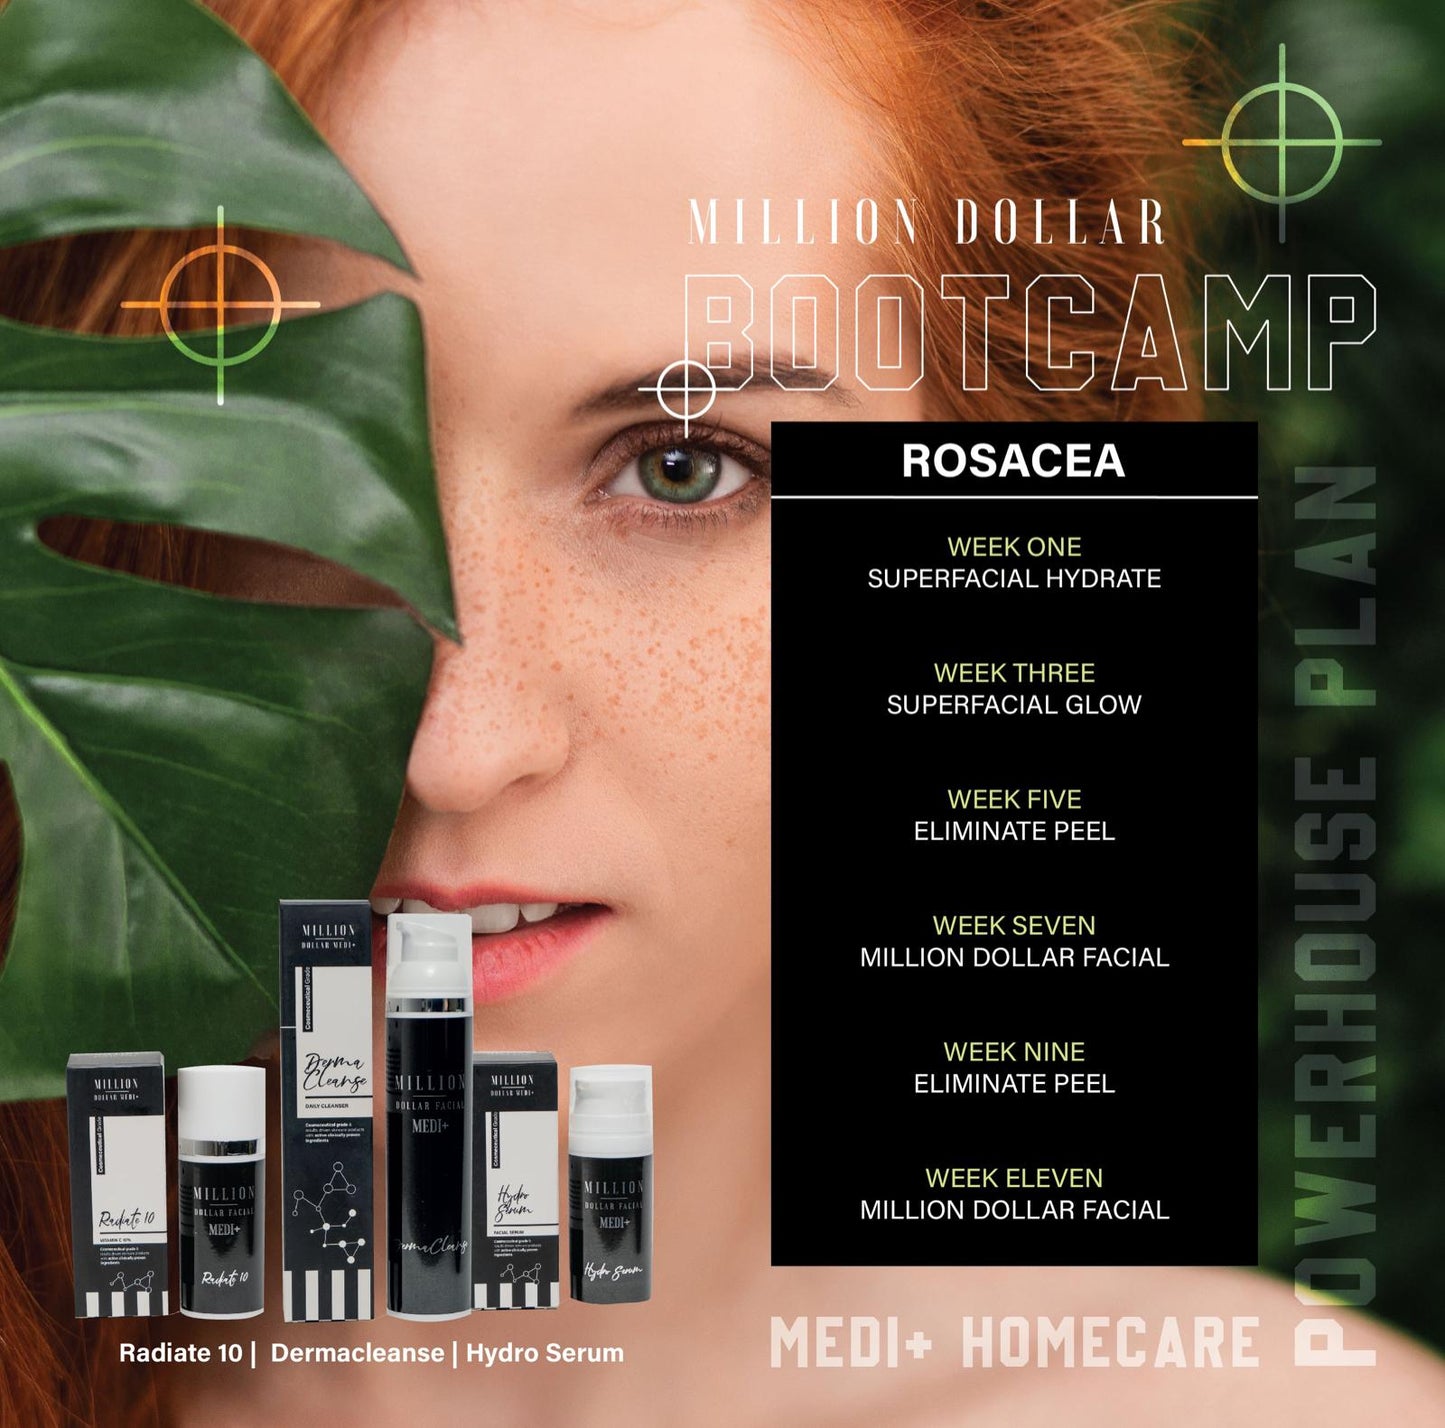 Bootcamp: Rosacea - Product & Treatment Bundle (local clients only)